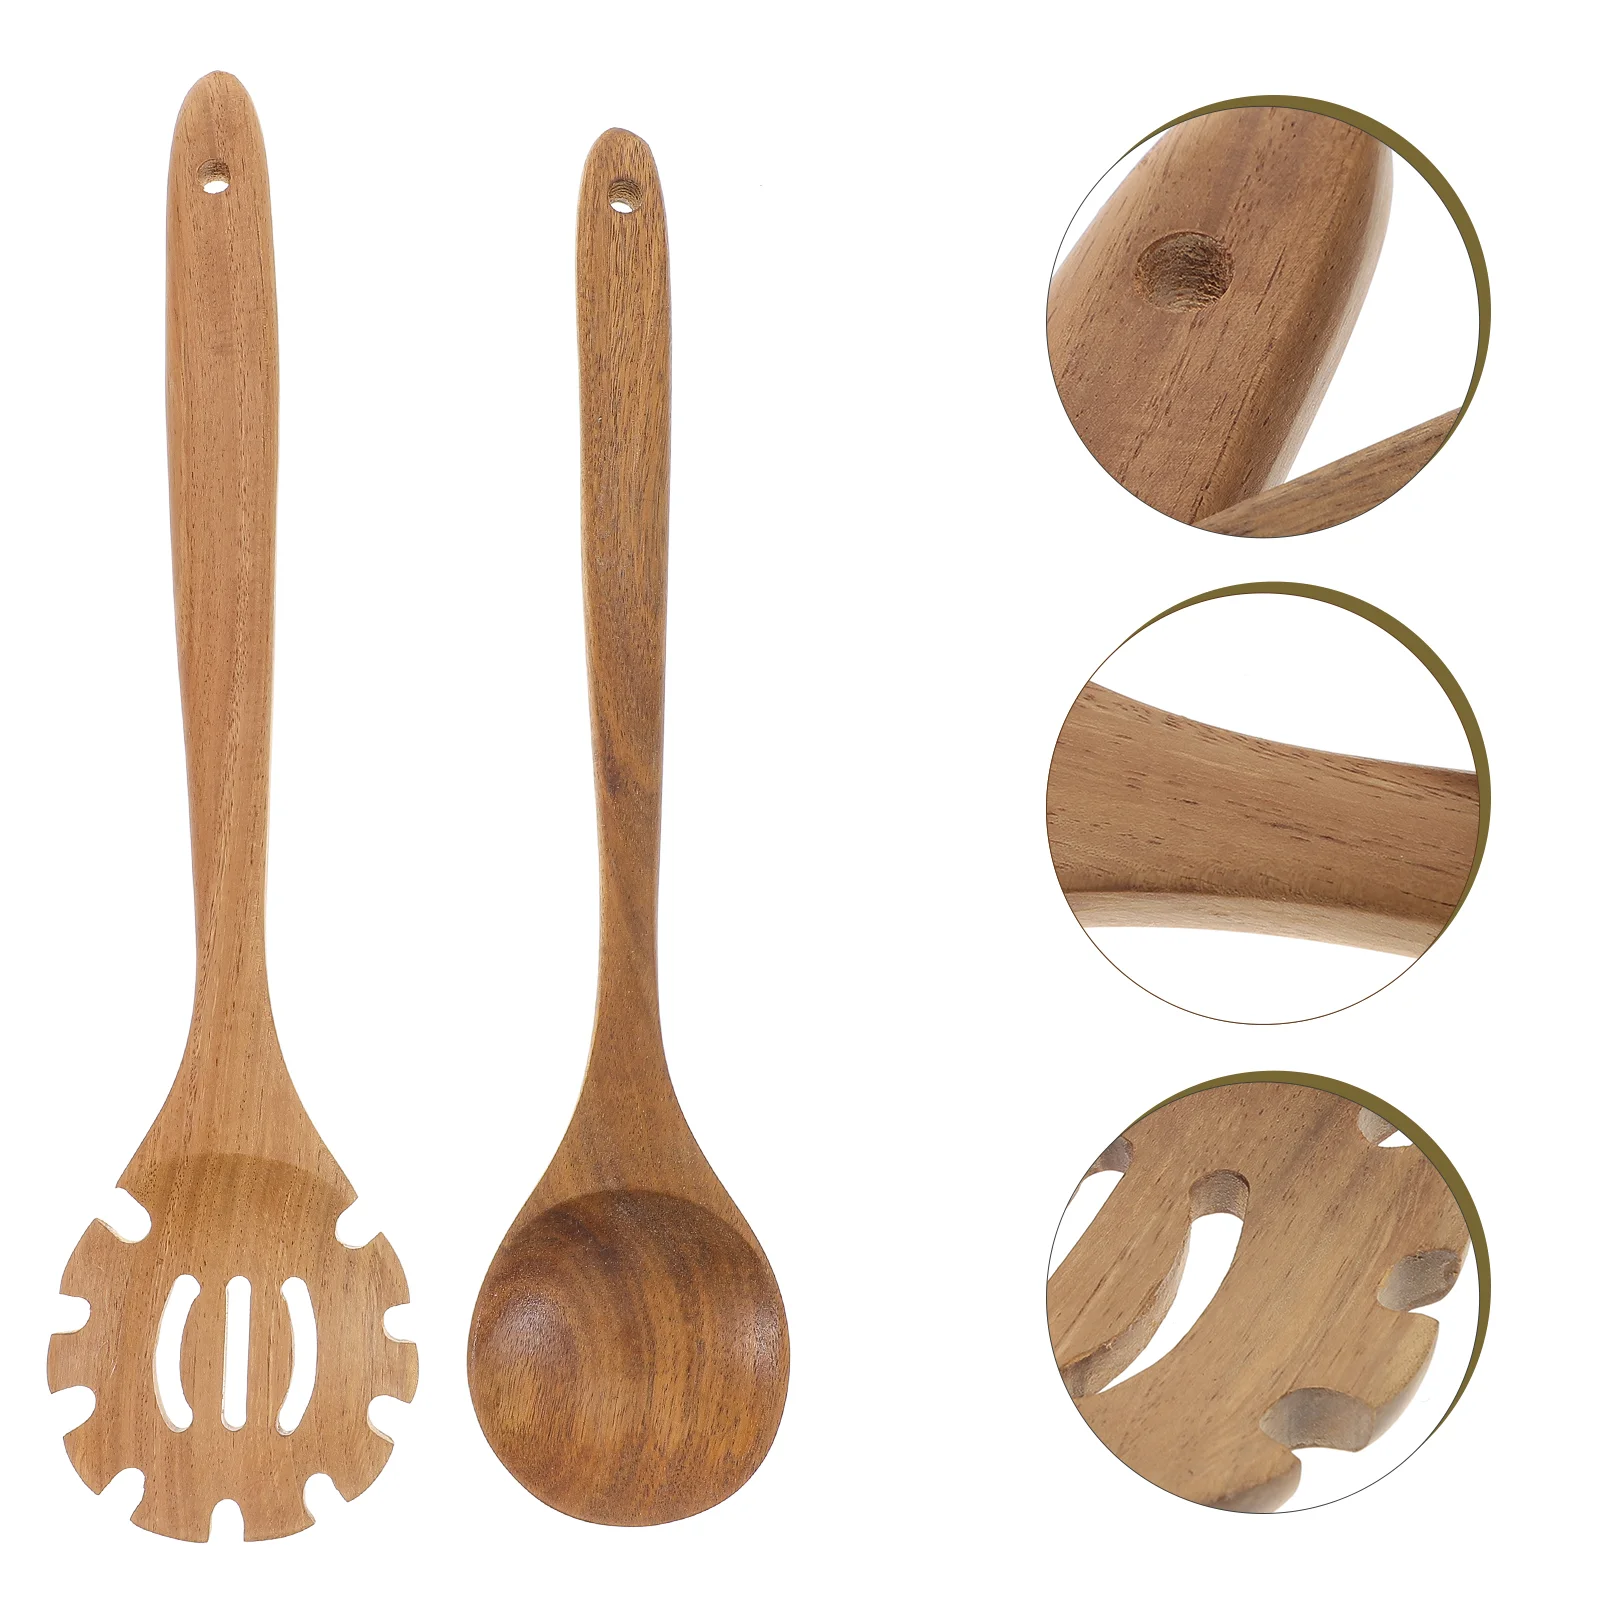 

Spoon Wooden Spaghetti Pasta Ladle Kitchen Server Soup Cooking Serving Spoons Noodles Fork Slotted Utensil Noodle Rice Mixing